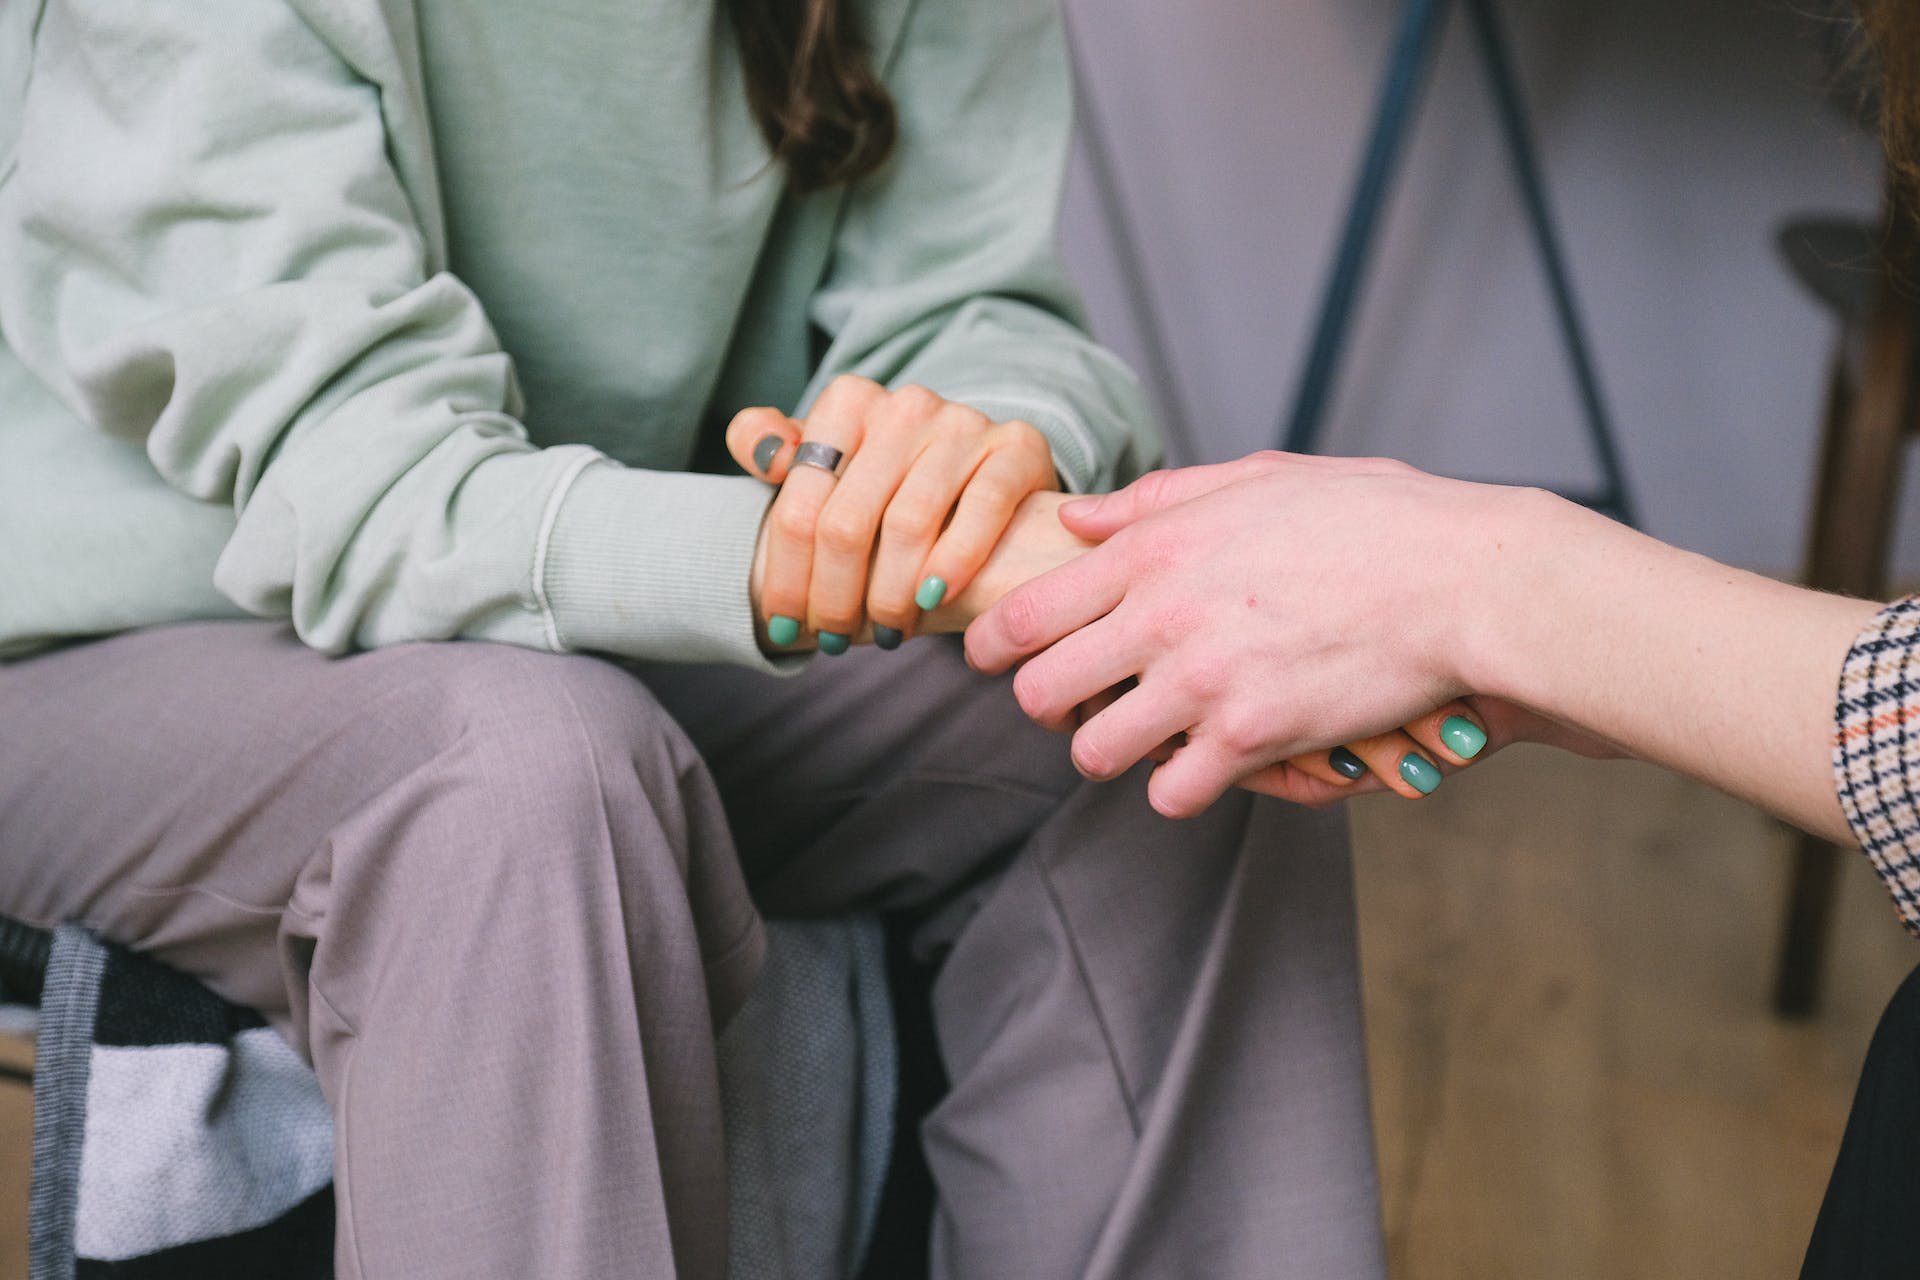 Two people holding hands in support | Source: Pexels